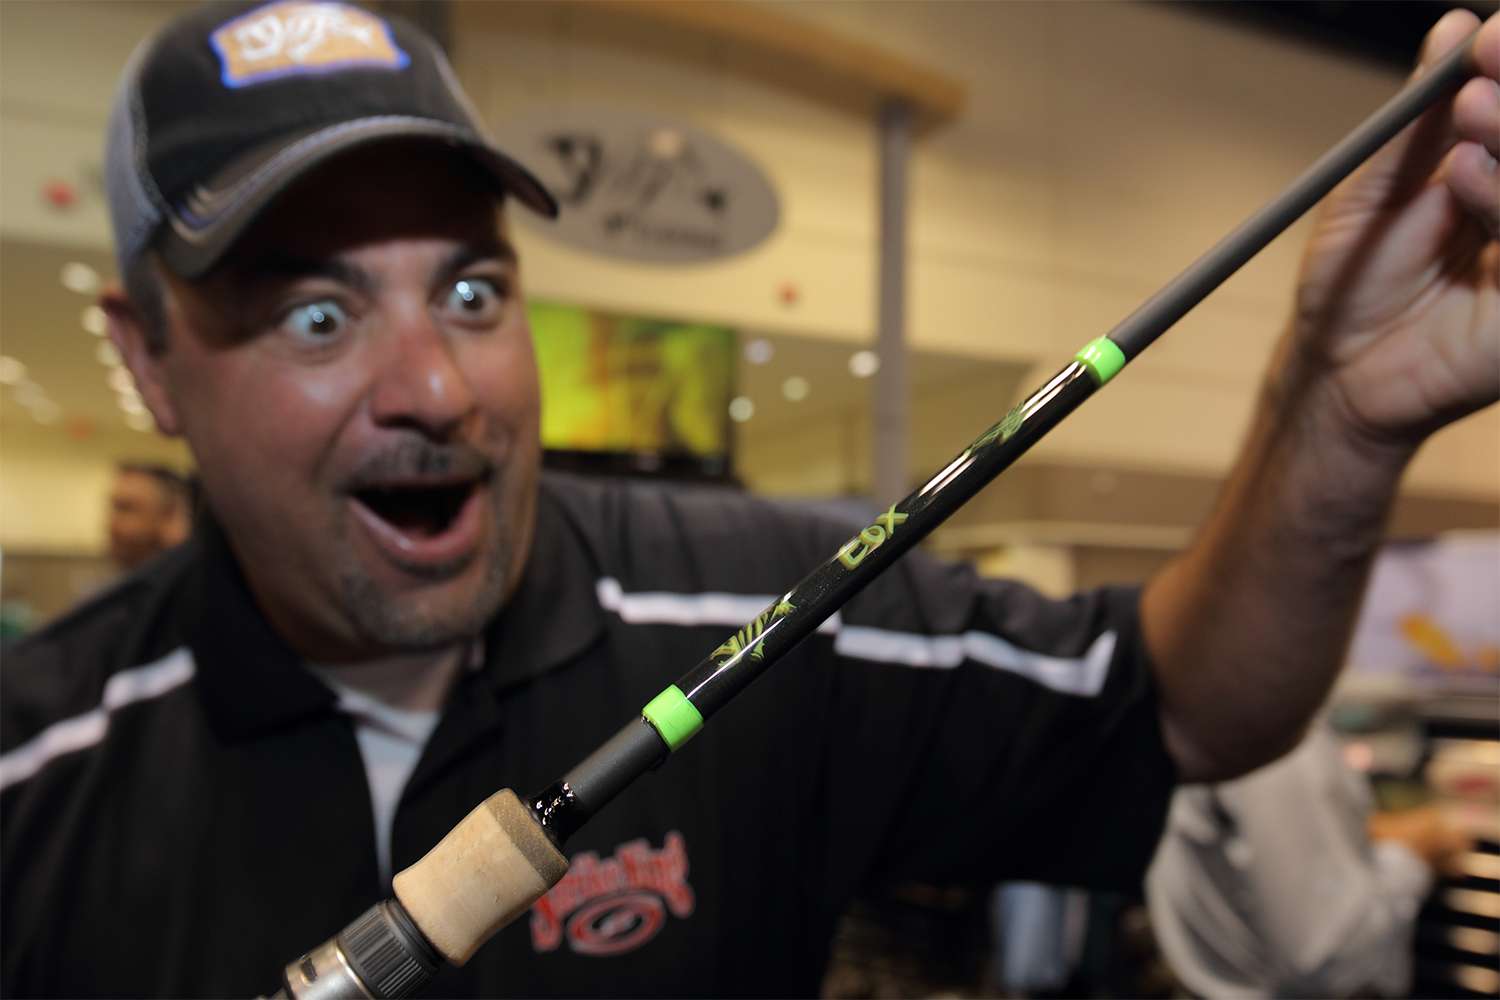 Mark Zona is like a kid in a candy store at ICAST. Karen, hint, hint. G. Loomis E6X under the tree.